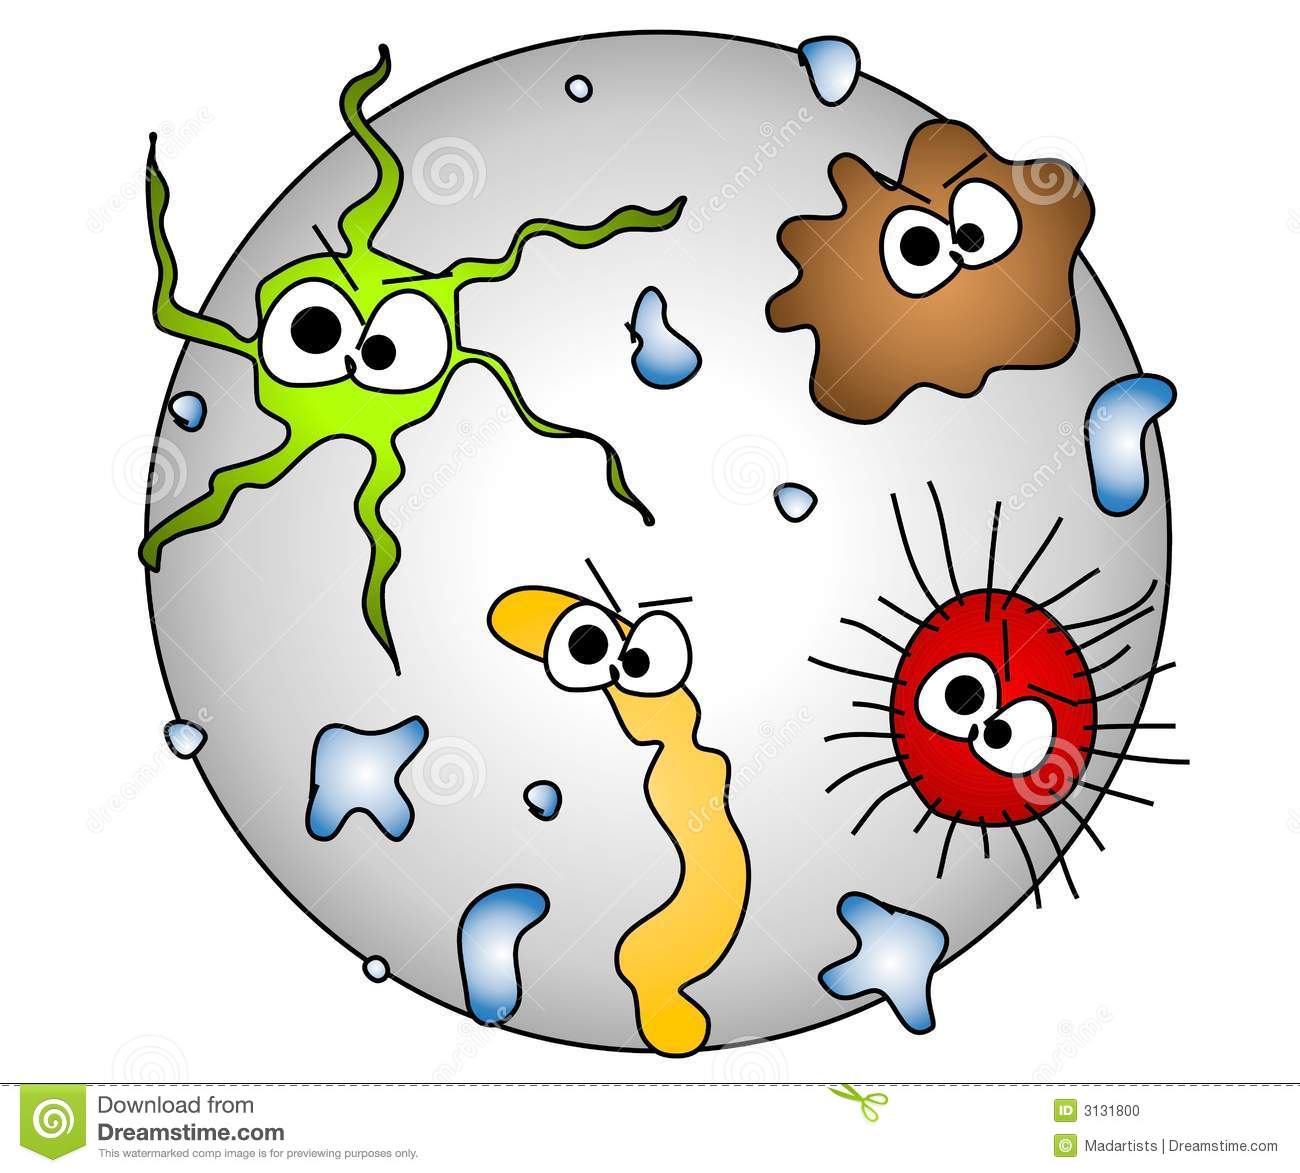 212 Germs free clipart.